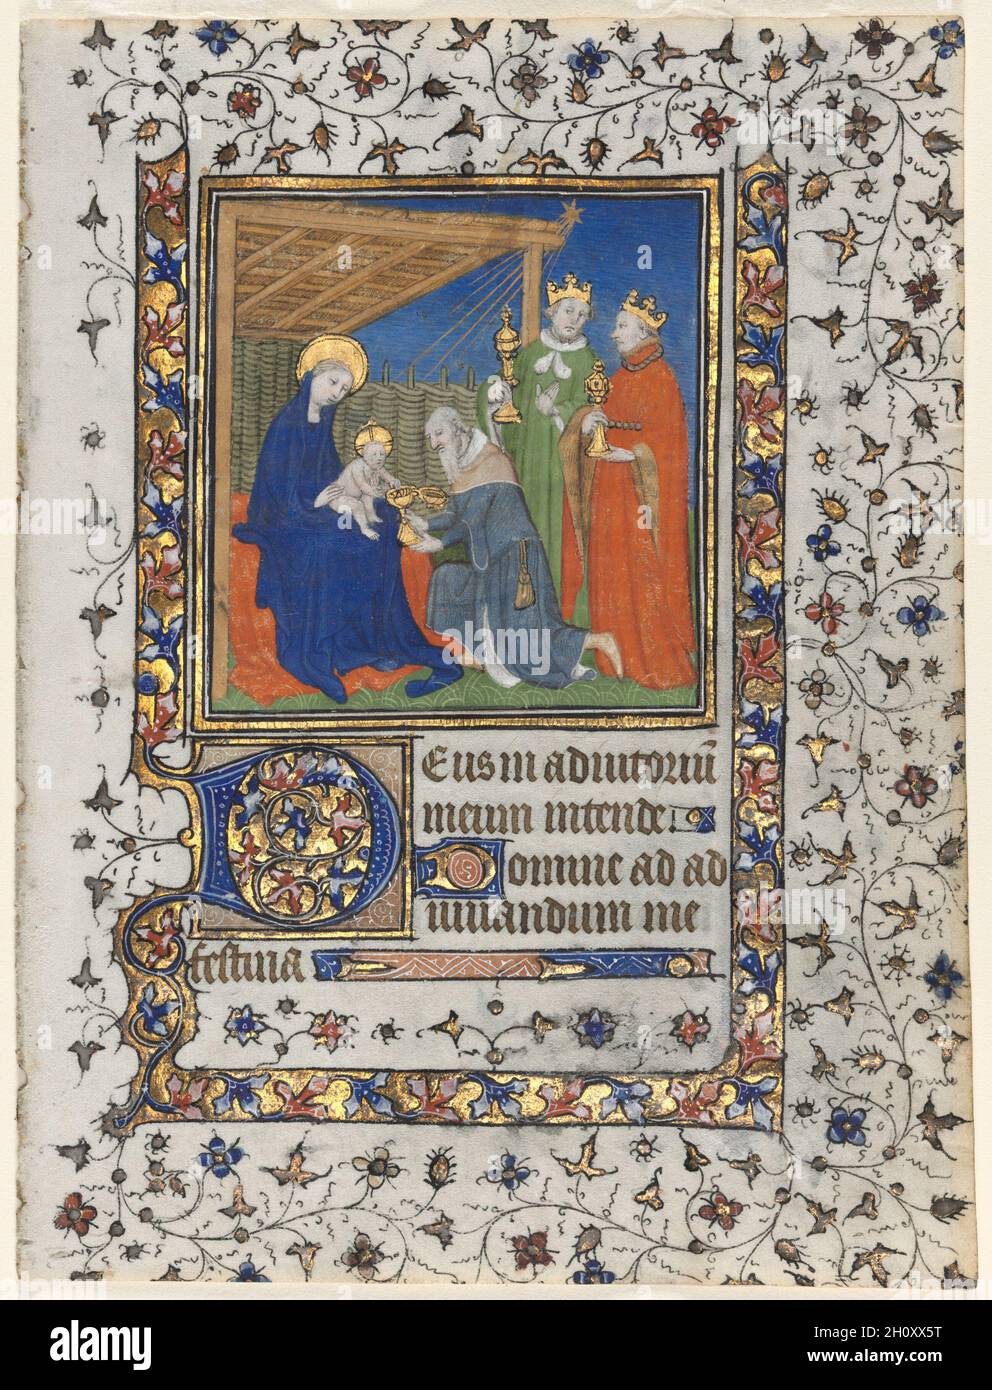 Bifolio from a Book of Hours: Adoration of the Magi, c. 1415. Workshop of Boucicaut Master (French, Paris, active about 1410-25). Ink, tempera, and gold on vellum; folio: 16.8 x 12.7 cm (6 5/8 x 5 in.). Stock Photo